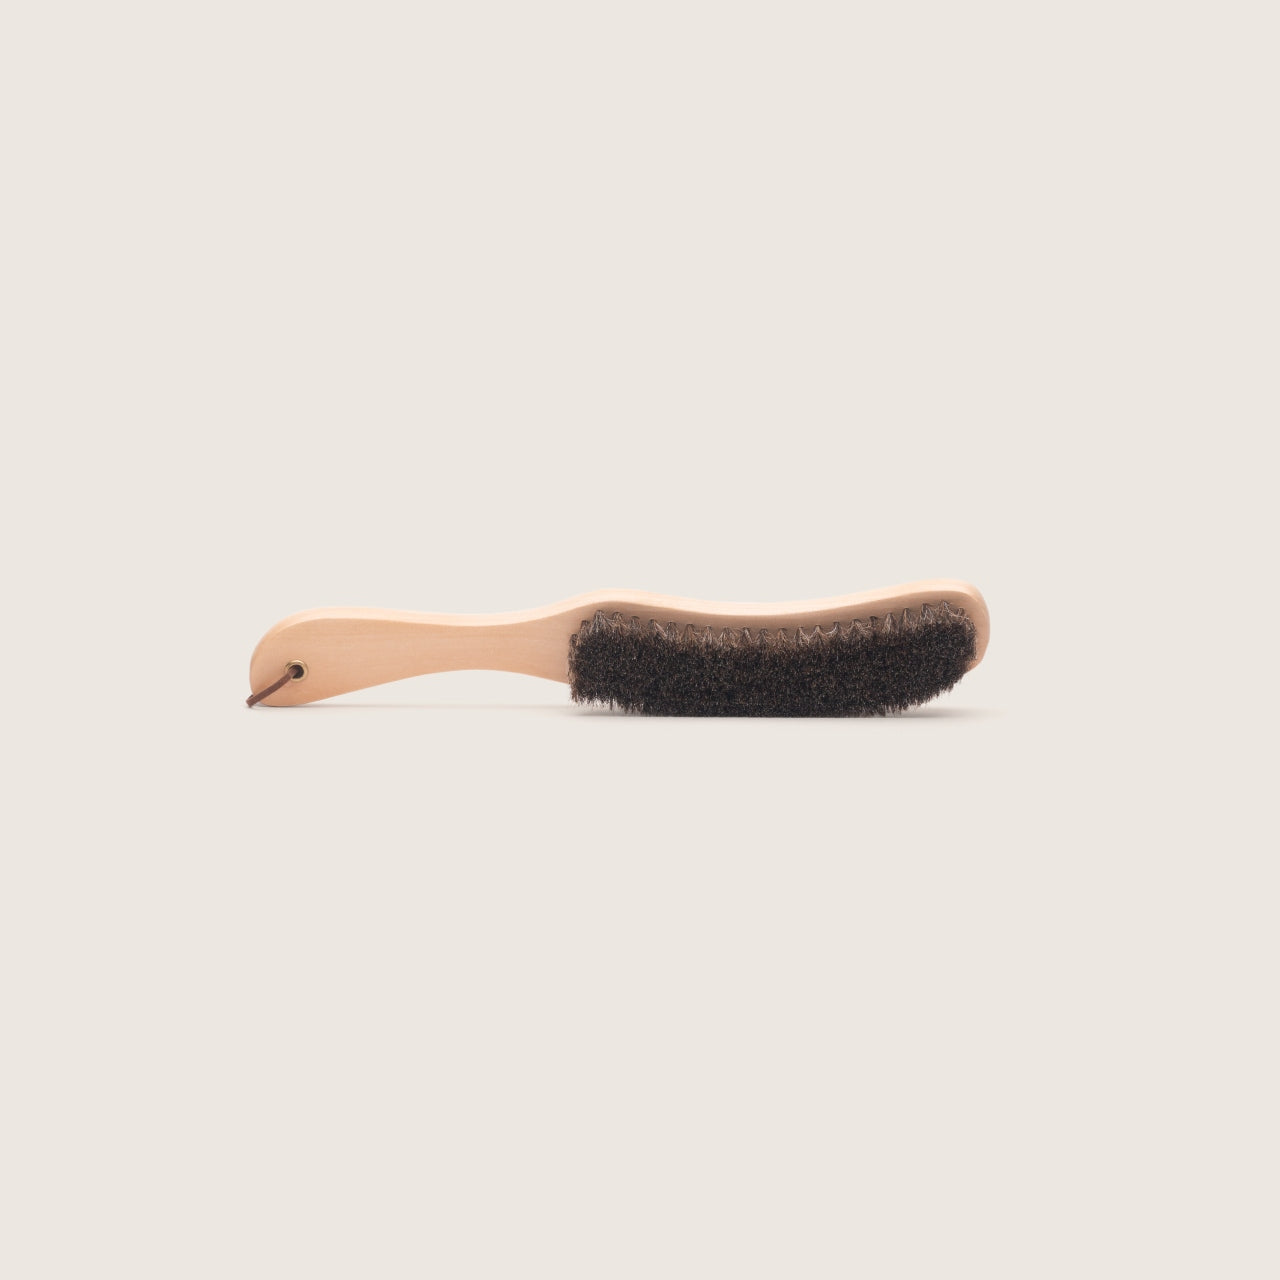 Soft bristle hat cleaning brush on a plain beige background